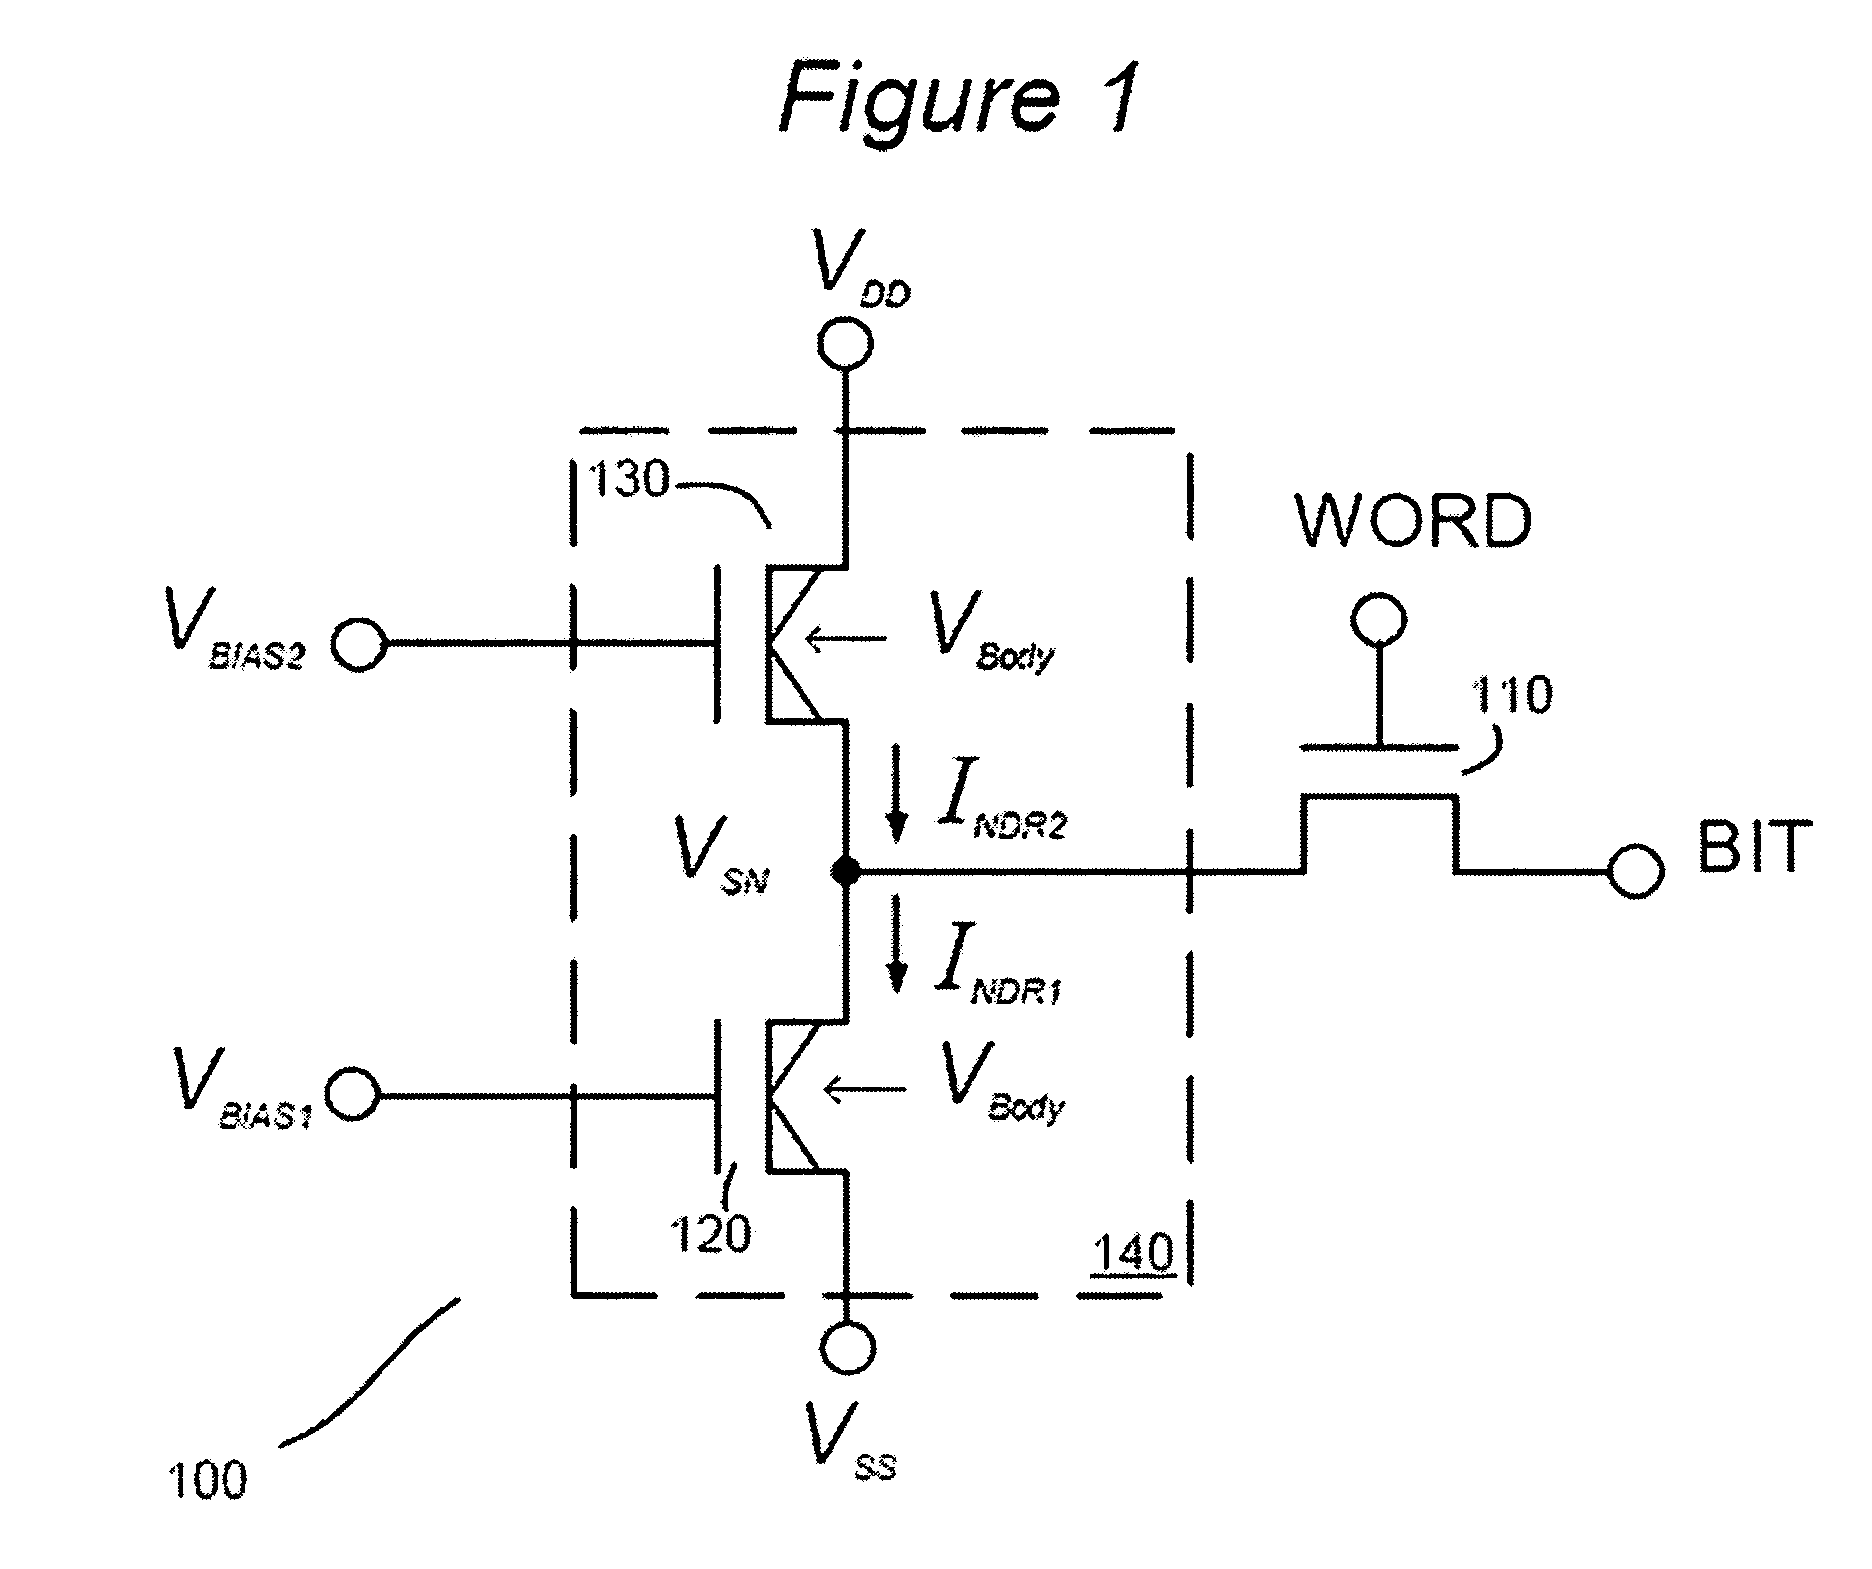 Variable voltage supply bias and methods for negative differential resistance (NDR) based memory device